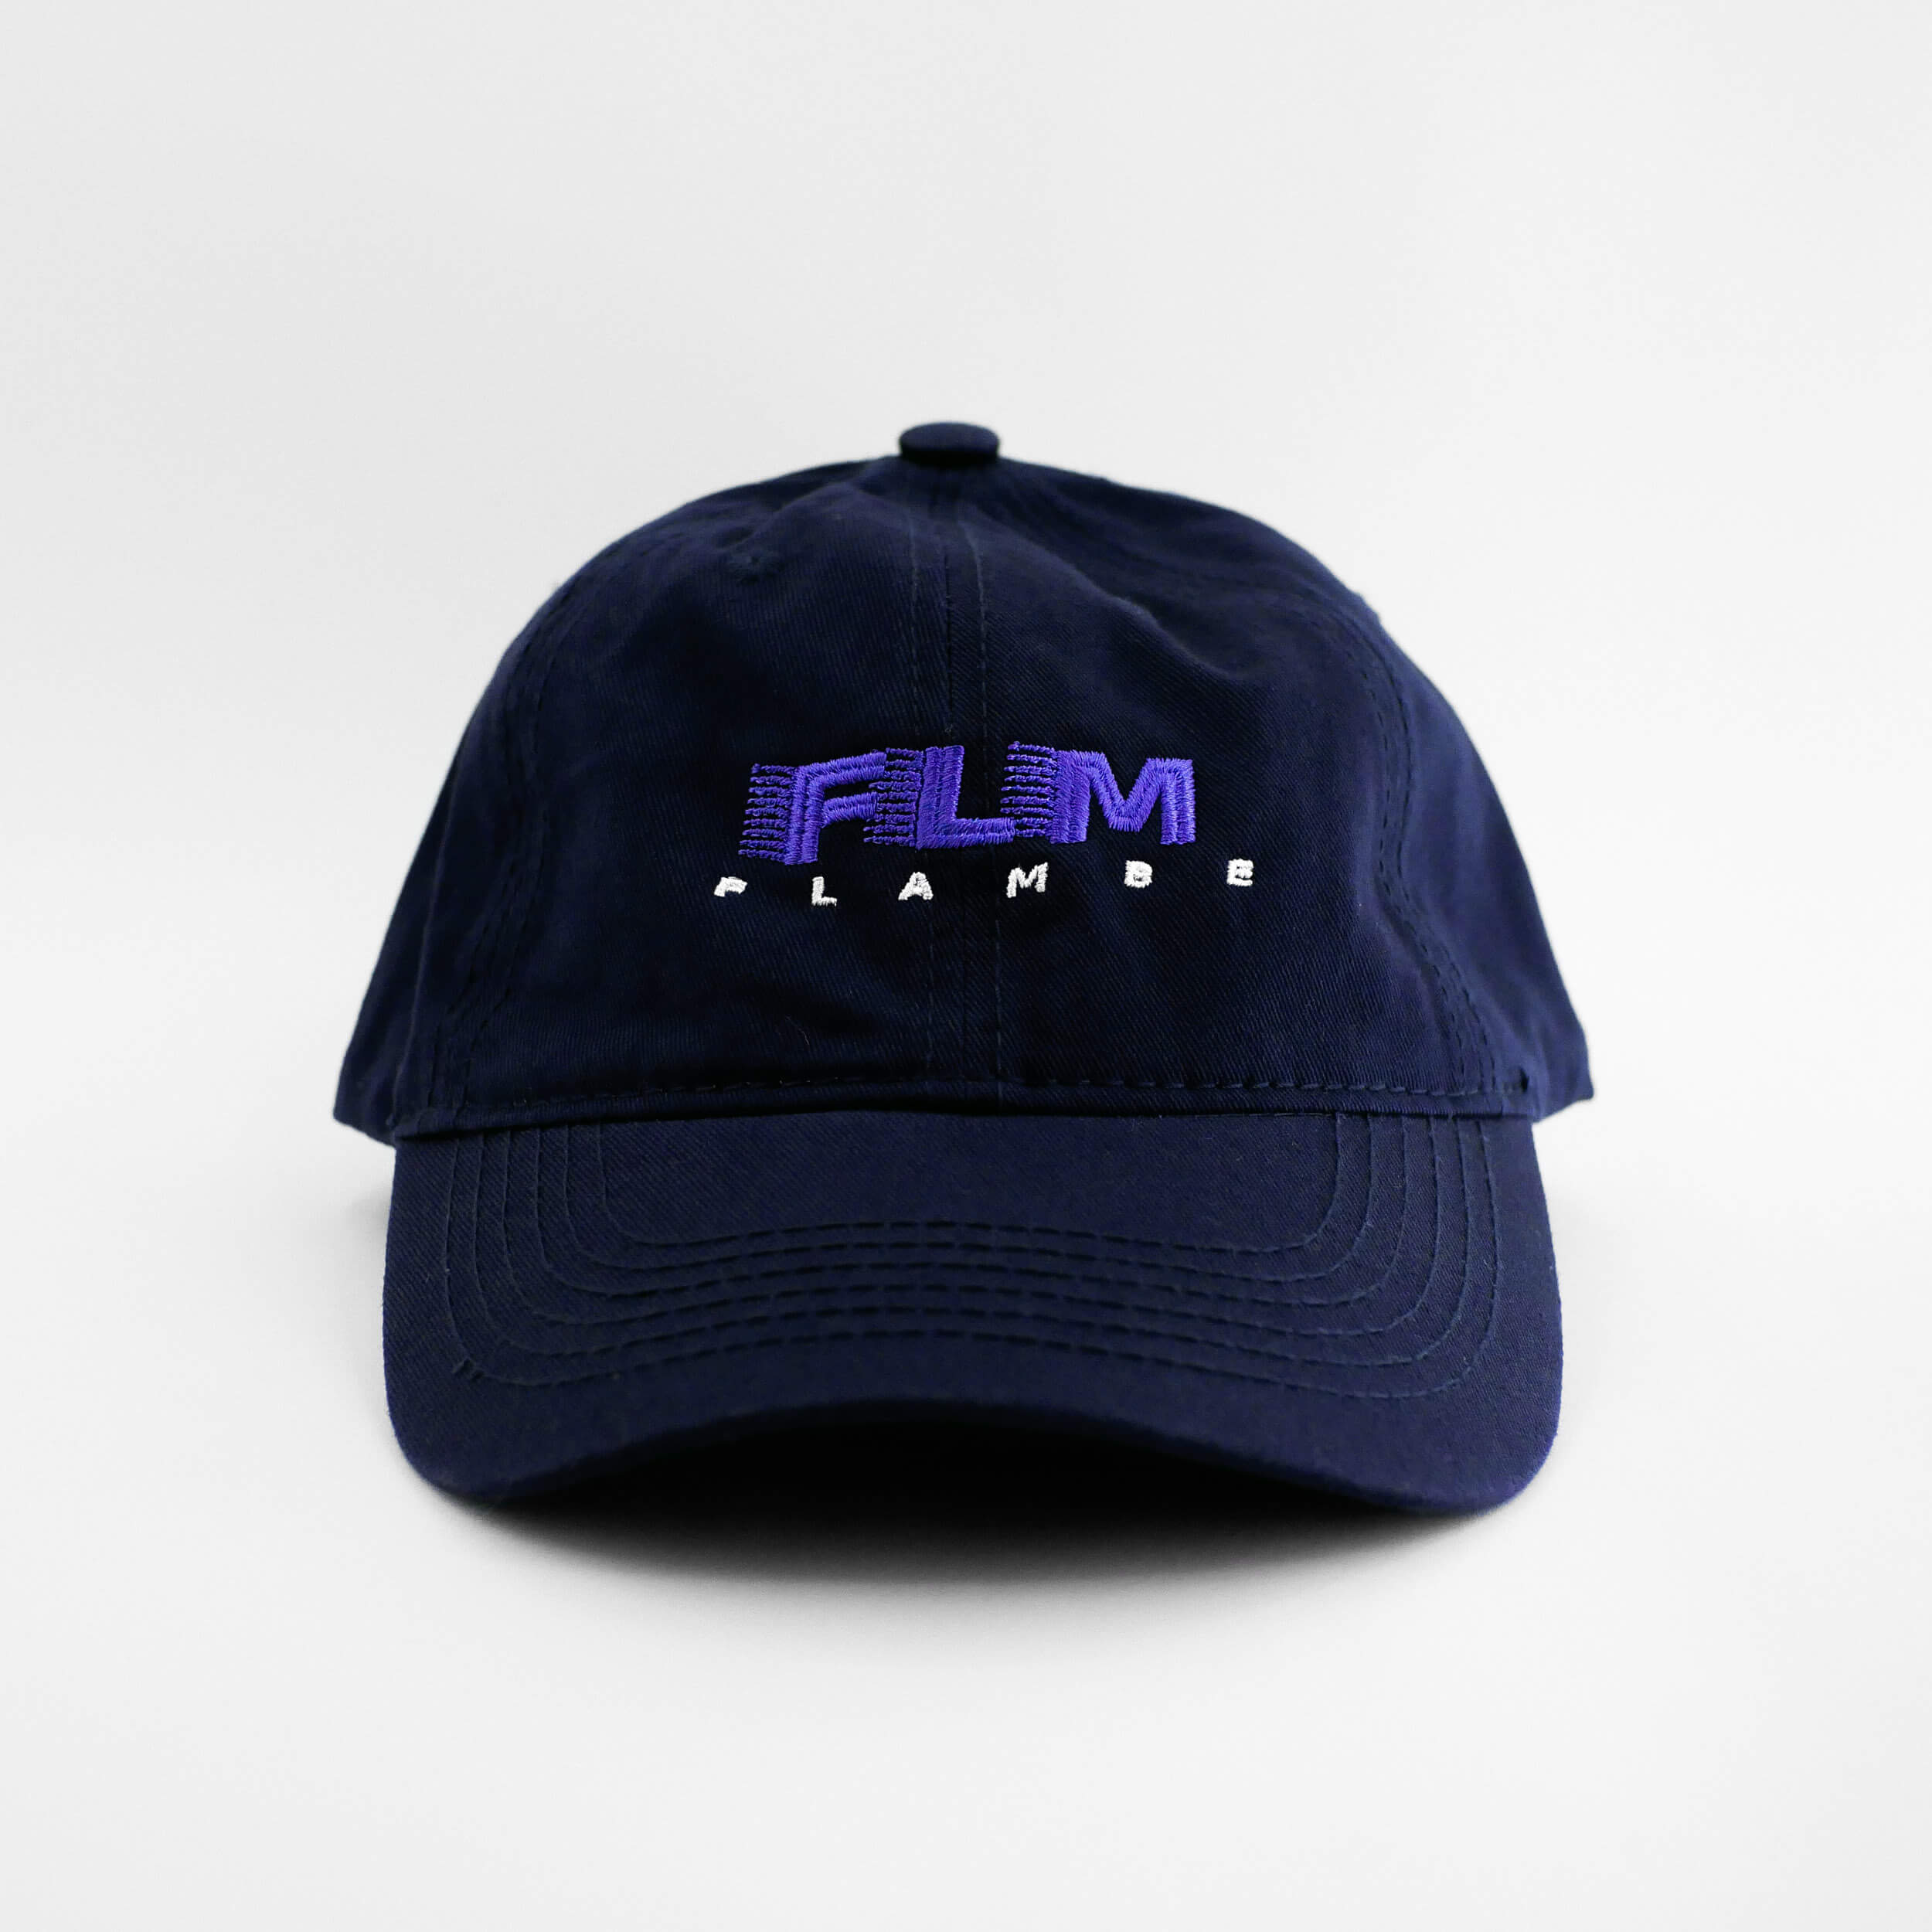 Front view of the embroidered 'FLAMBE' navy blue hat from PHOSIS Clothing